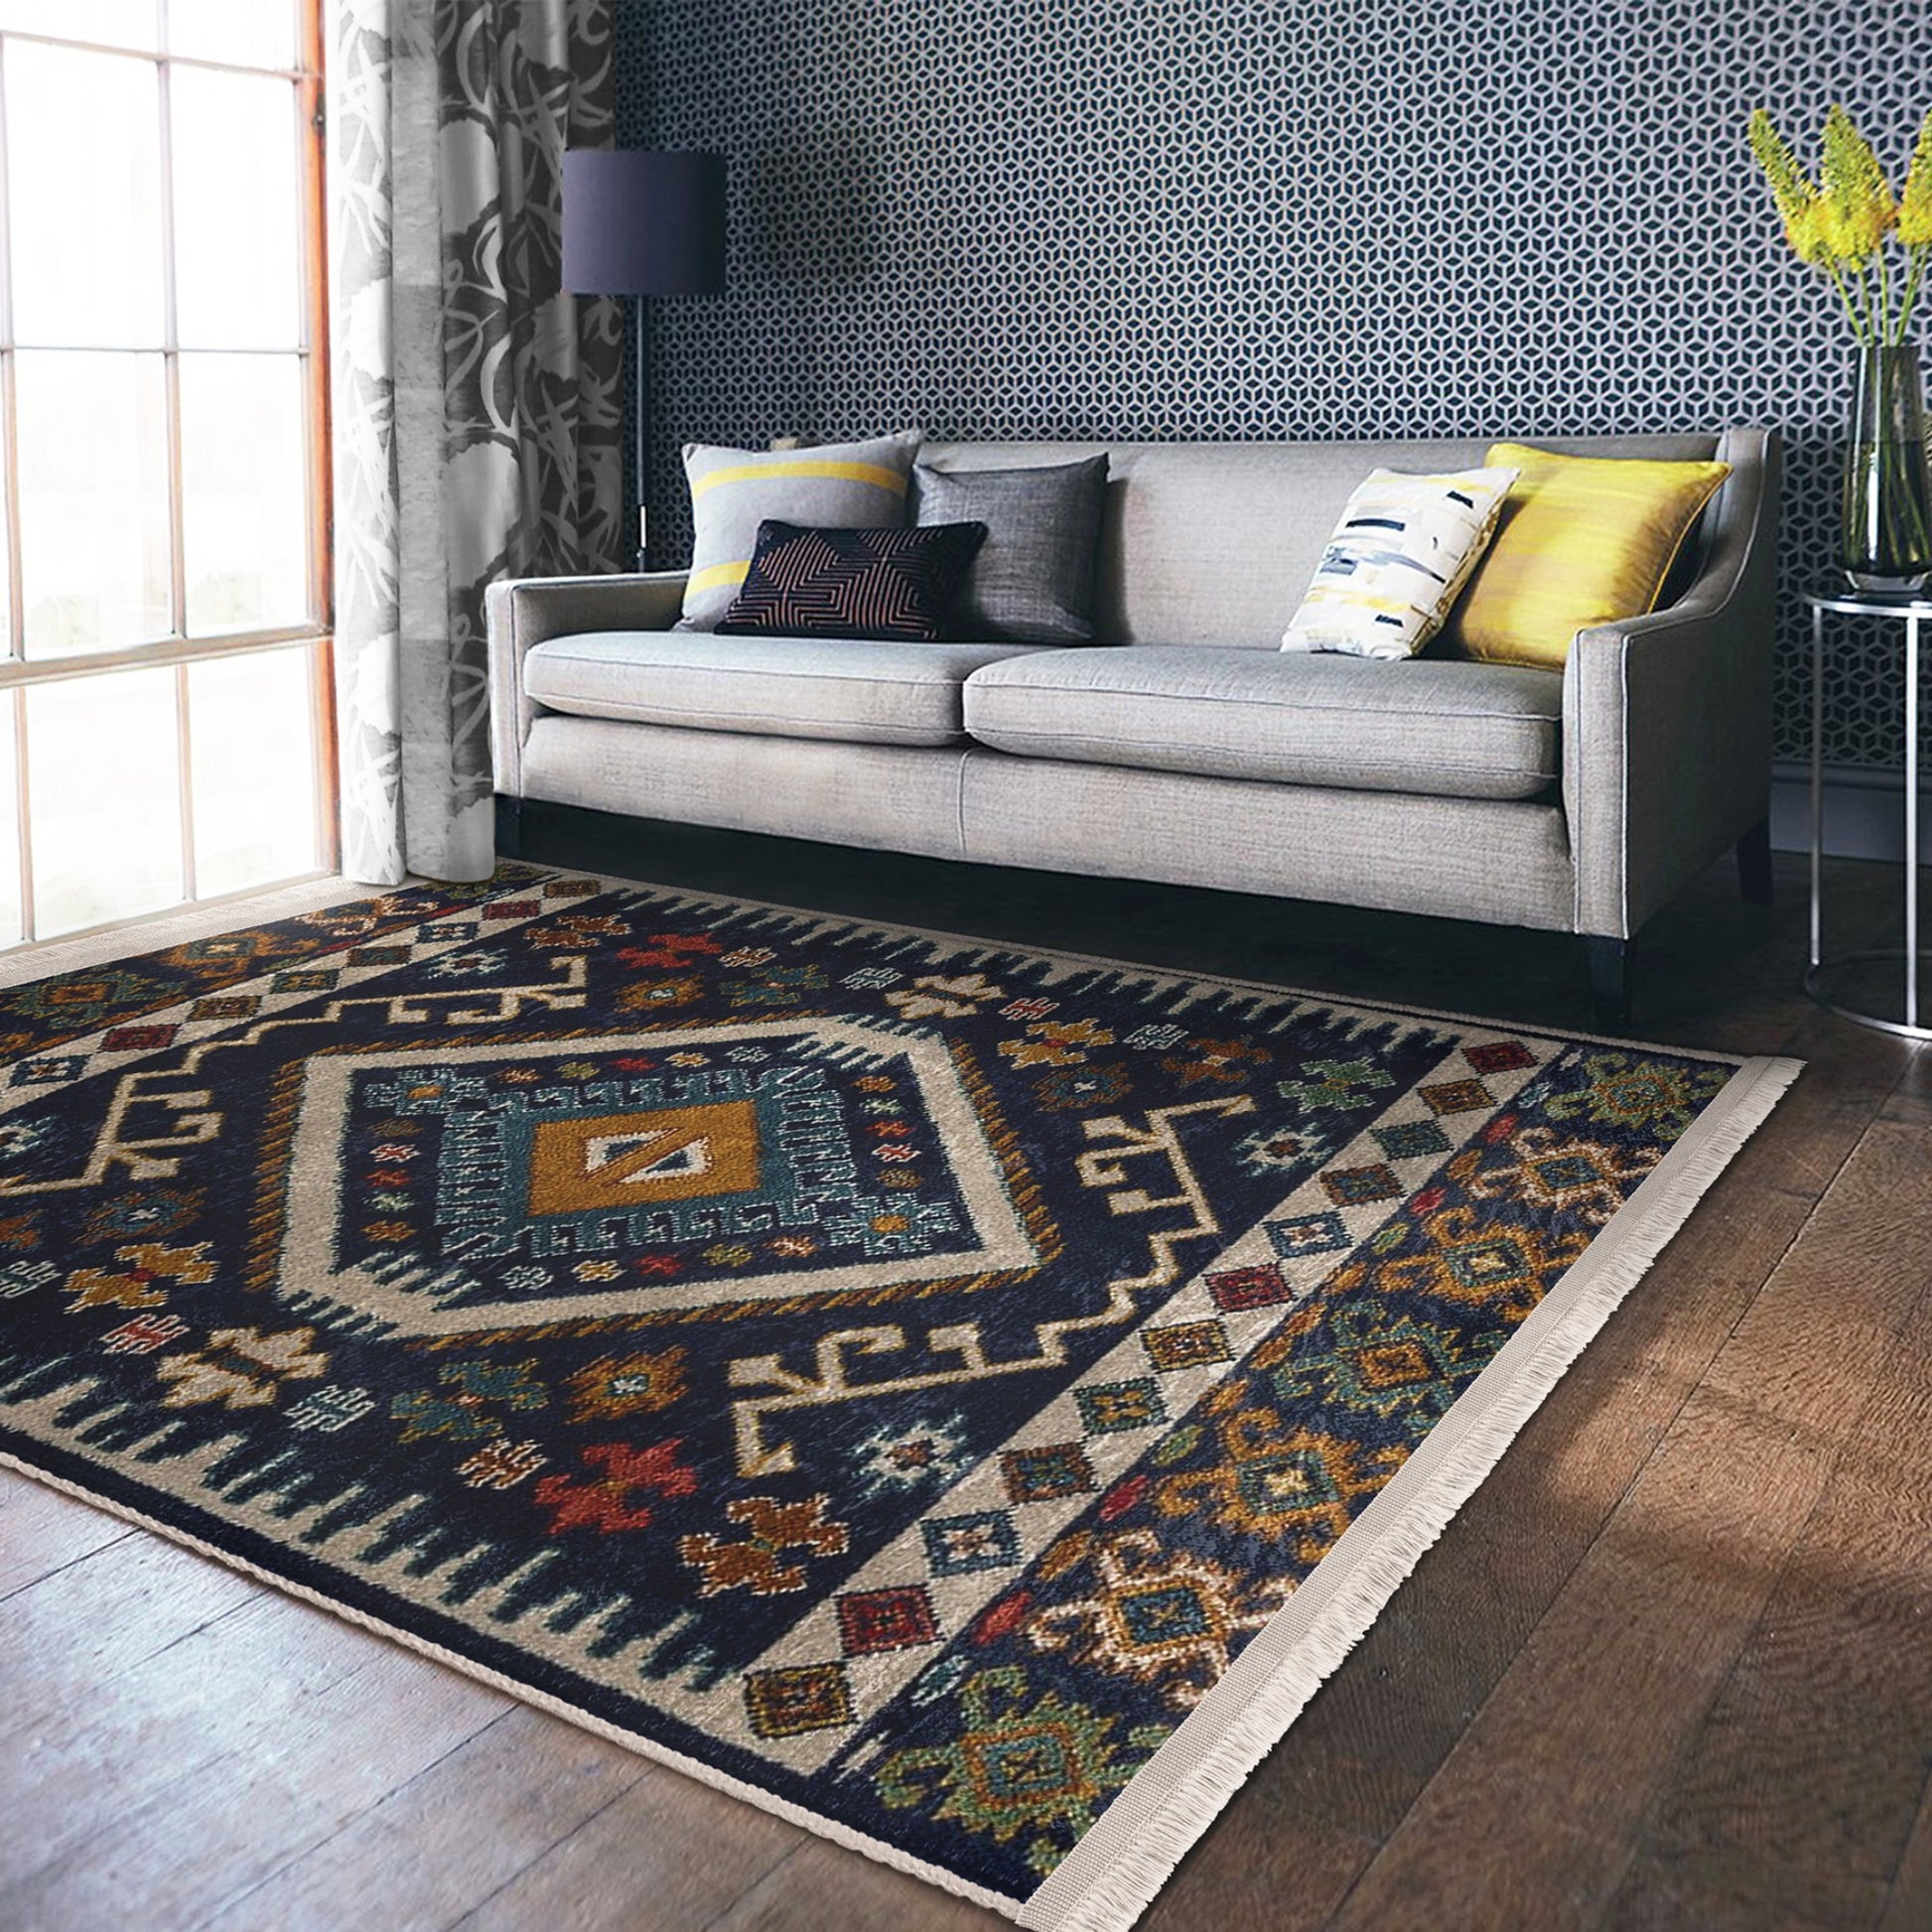 Functional Rug with Warmth and Charm of the Southwest